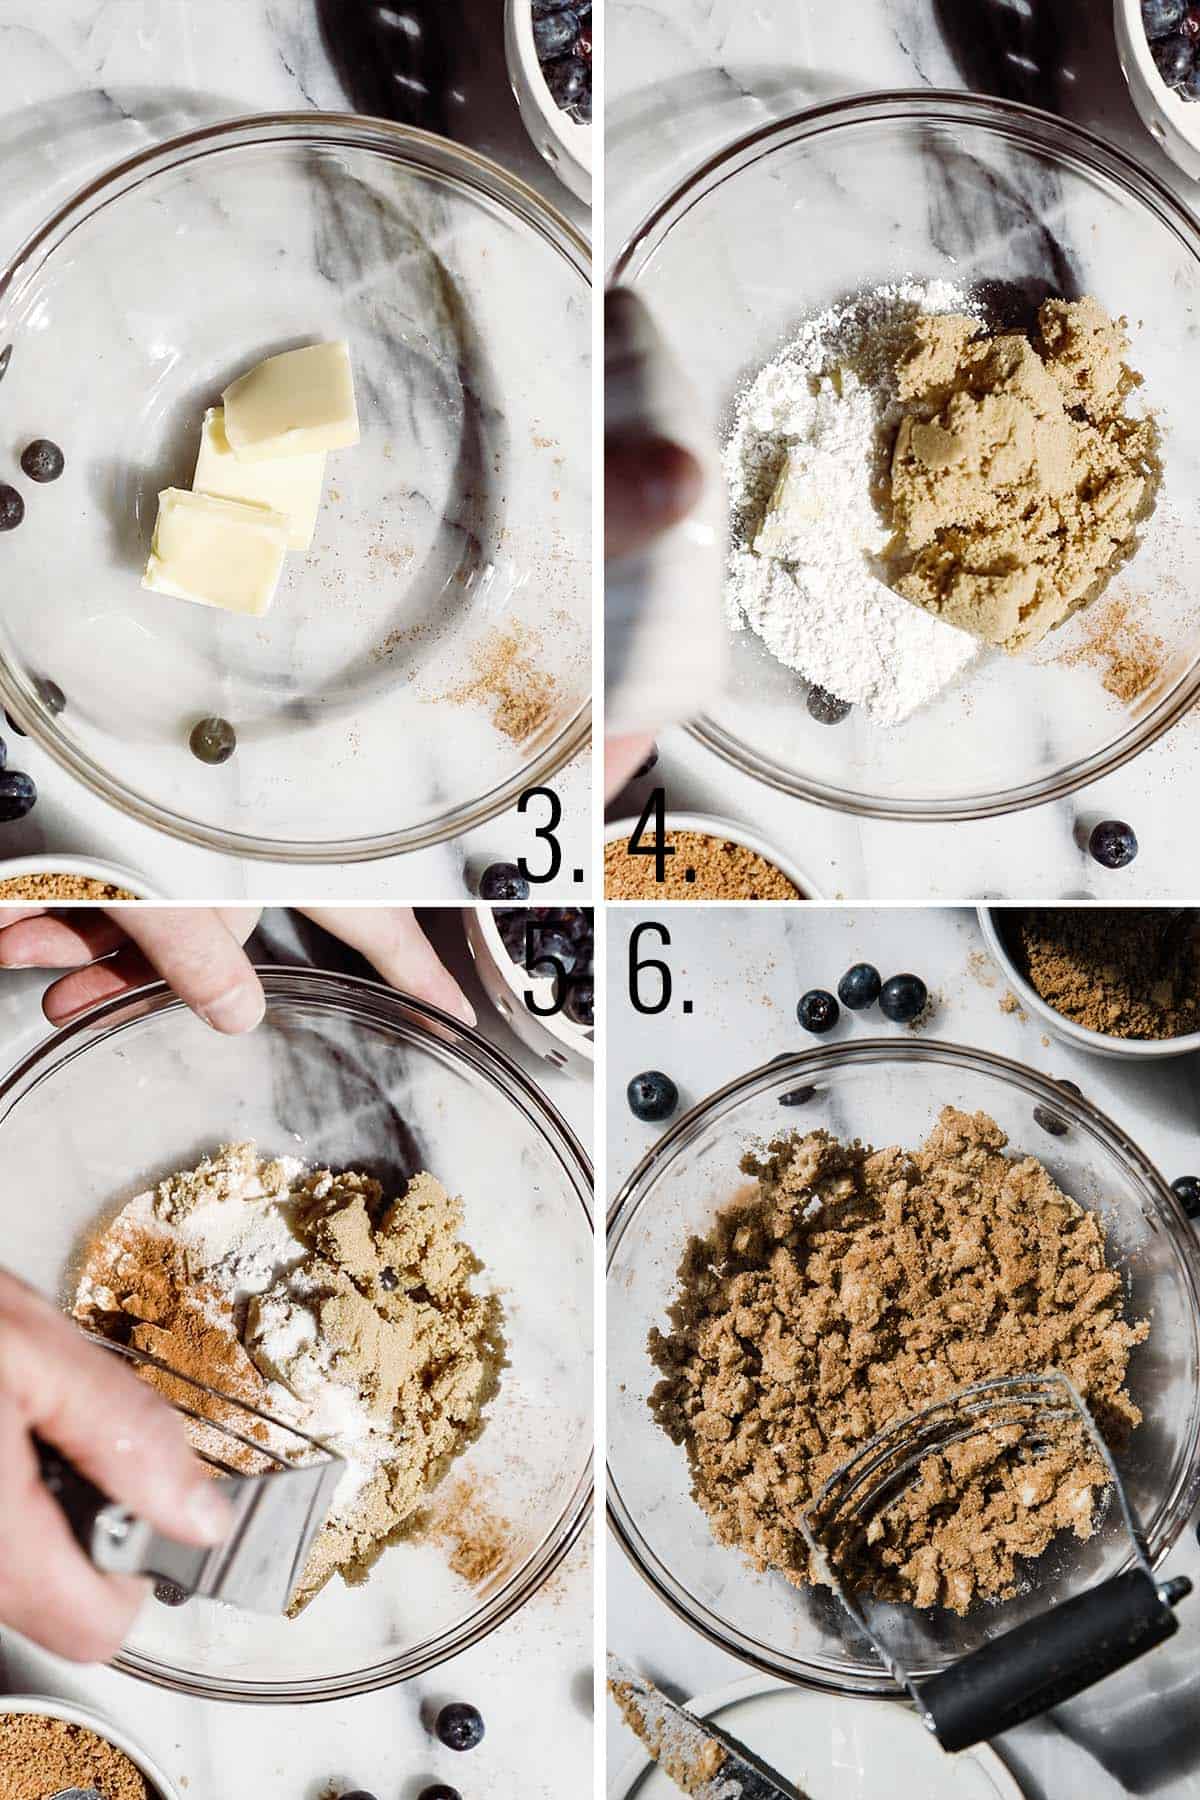 How to make a streusel topping.